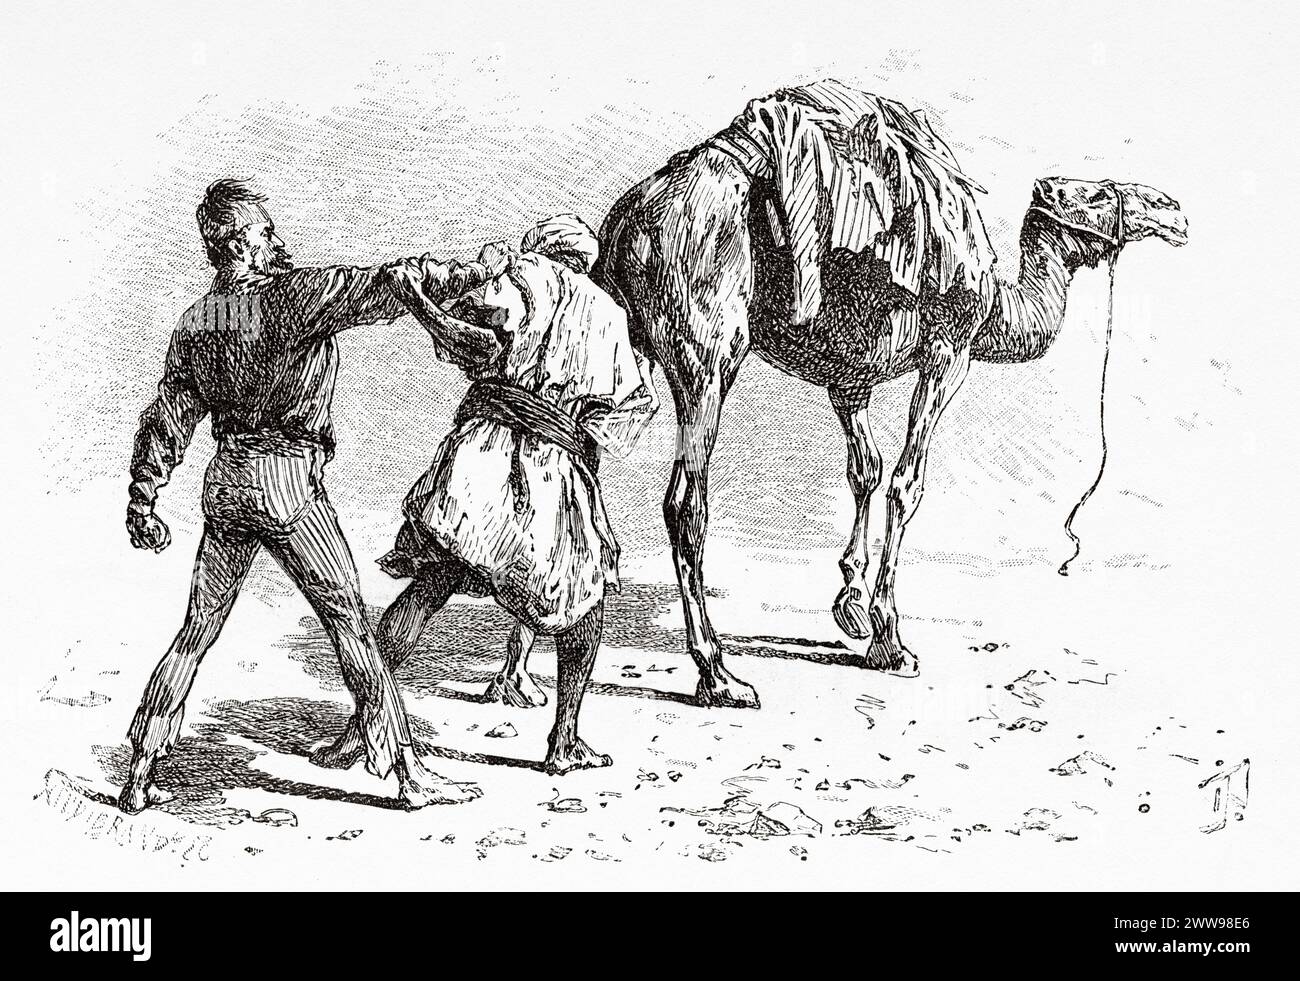 The expedition on its return through the desert, Tibesti Region, Chad, Africa. Drawing by Ivan Pranishnikoff (1841 - 1909) Two months in Tibesti, episodes from travels in Africa 1869-1873 by Dr. Gustav Hermann Nachtigal (1834 - 1885) Le Tour du Monde 1880 Stock Photo